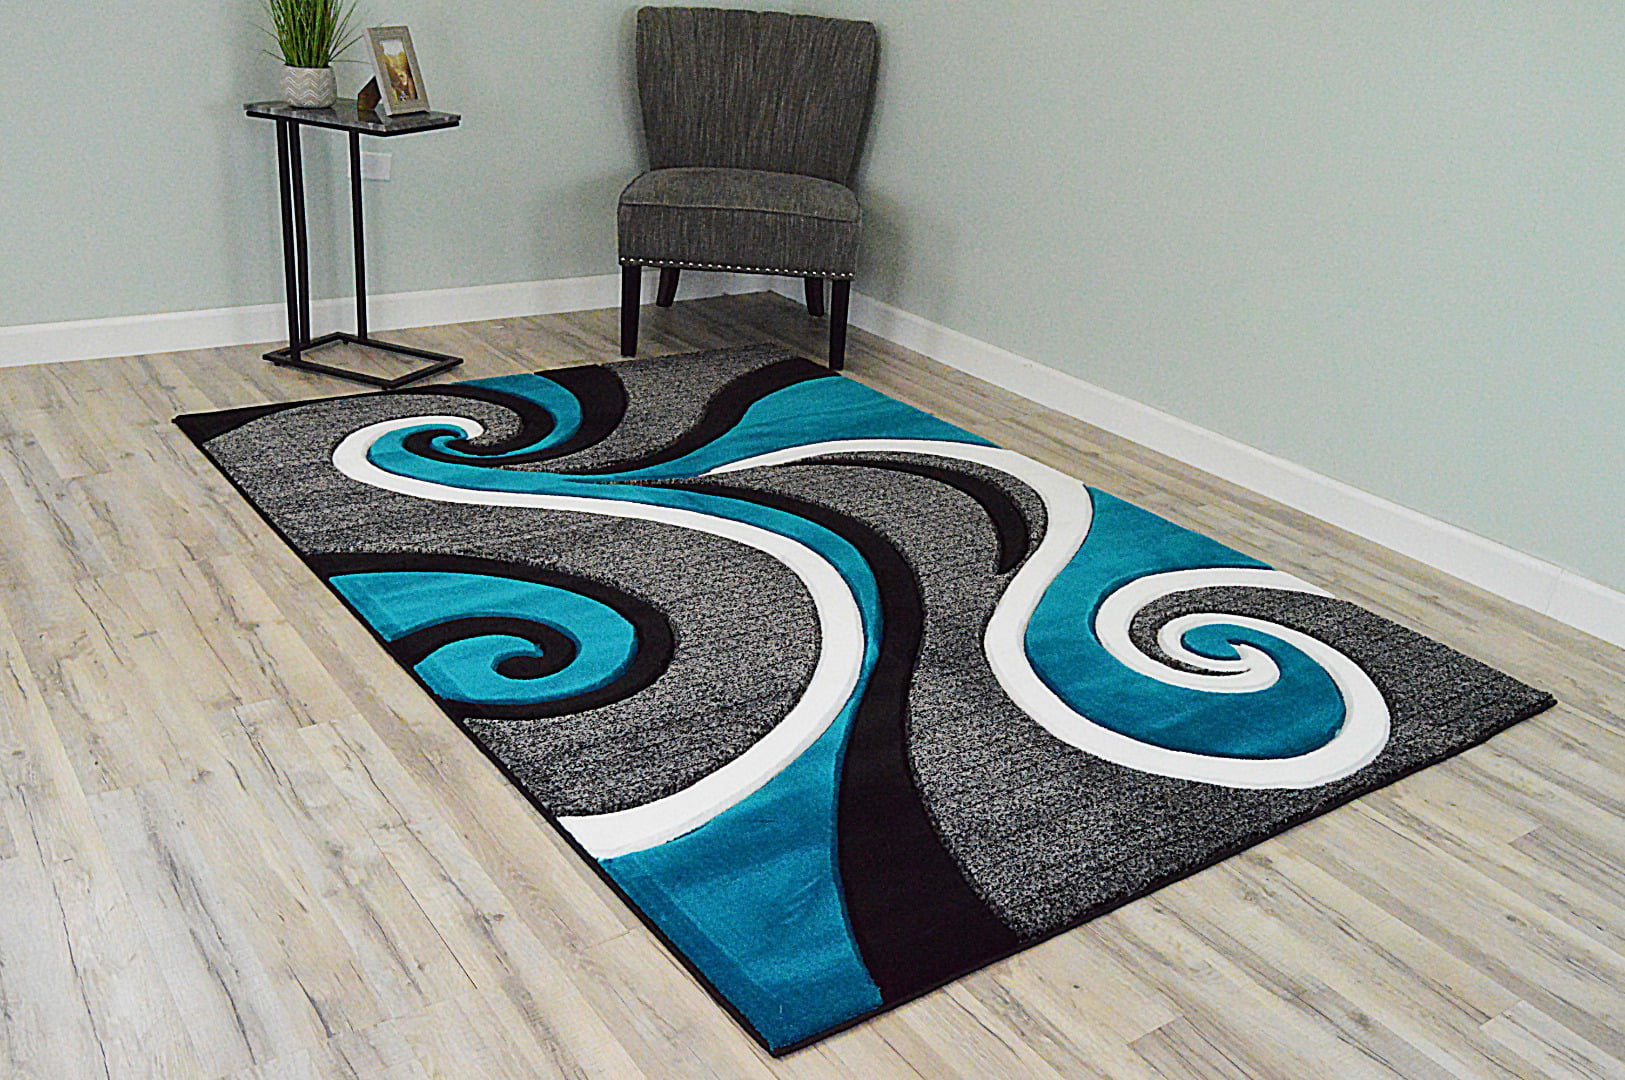 best abstract rugs Room living rug floor rugs carpet mat area modern
dining bedroom style walmart decor anti use visit